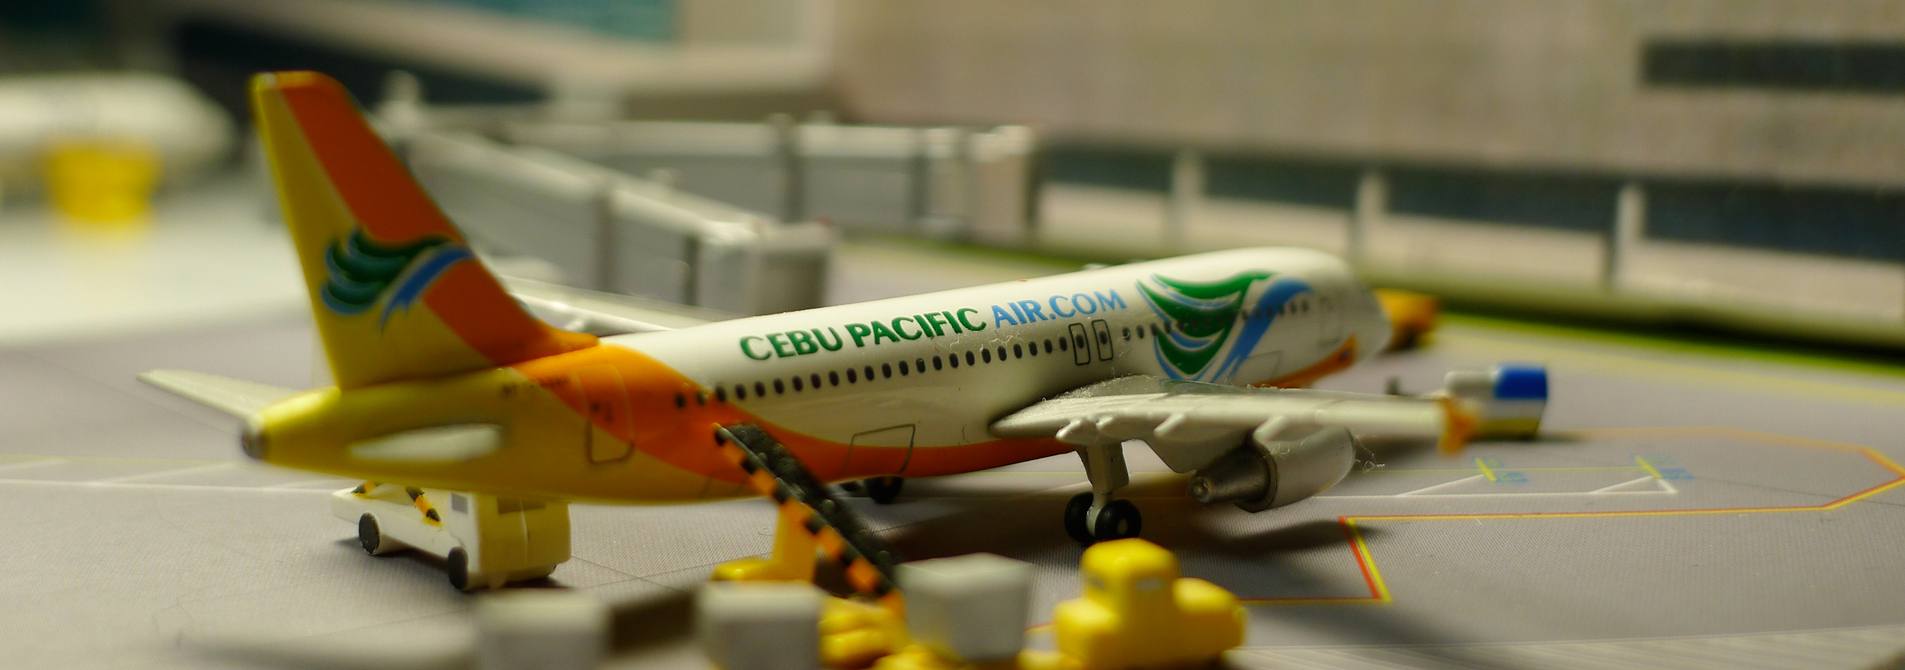   Cebu Pacific Air  booked more than 1 million cargo shipments in the last 12 months (one booking every minute).&nbsp;   That’s Volume!  